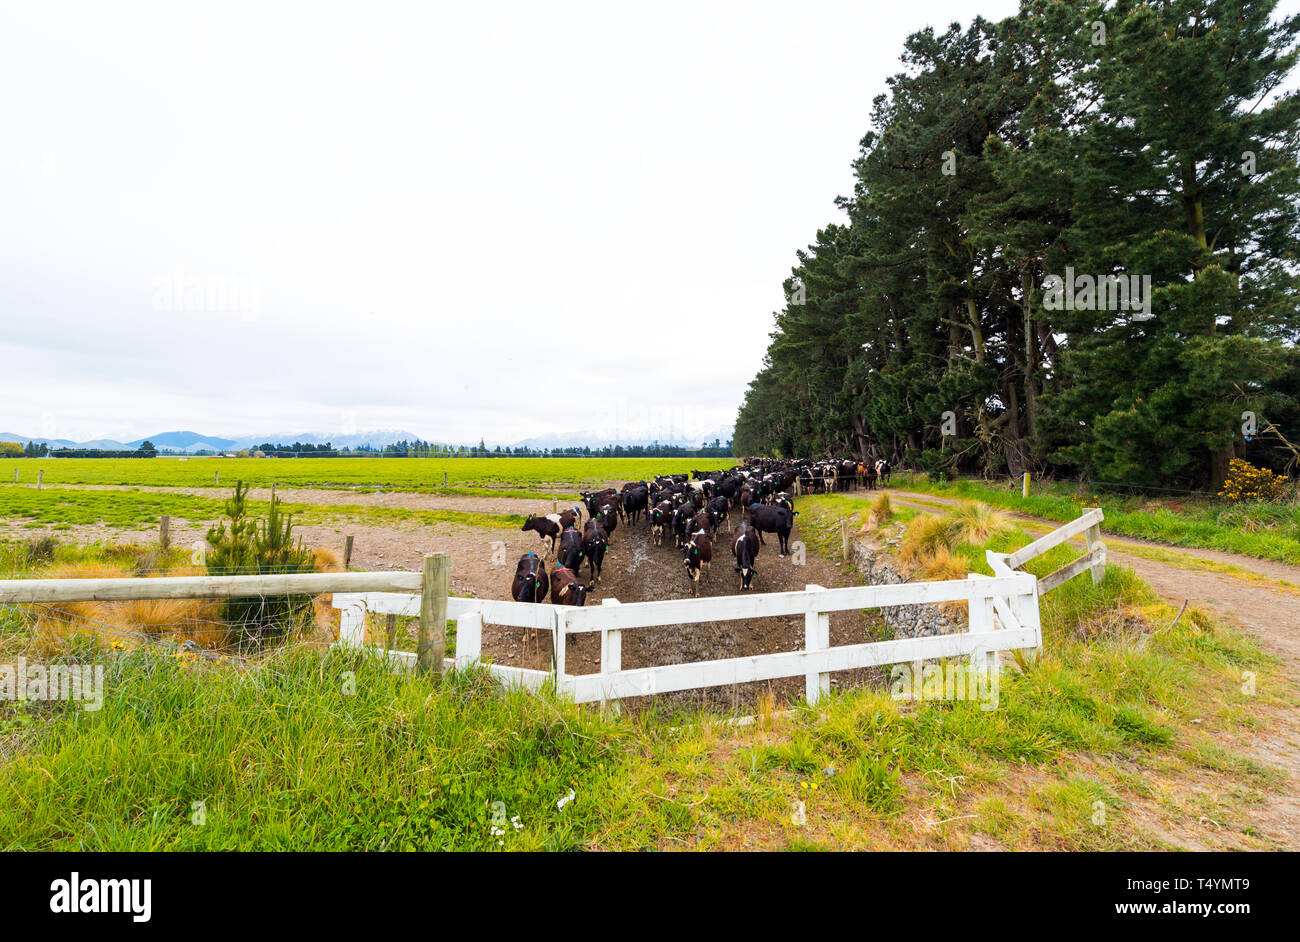 Herd of cows in the pen, Southern Alps, New Zealand sortiert. Copy space for text Stock Photo